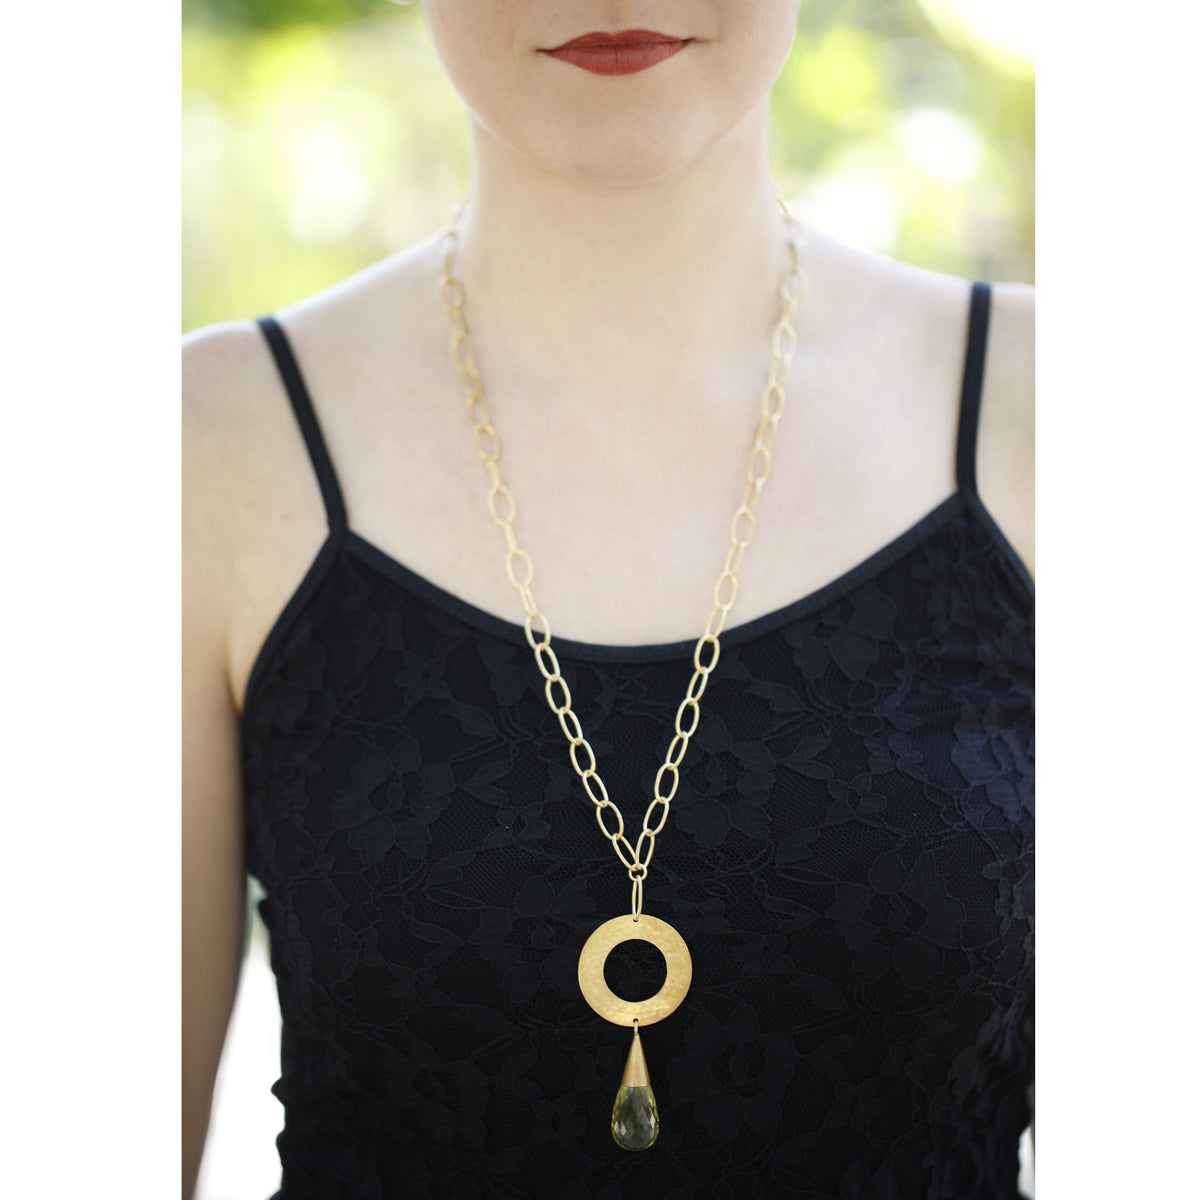 Gold plated silver links with lemon citrine necklace